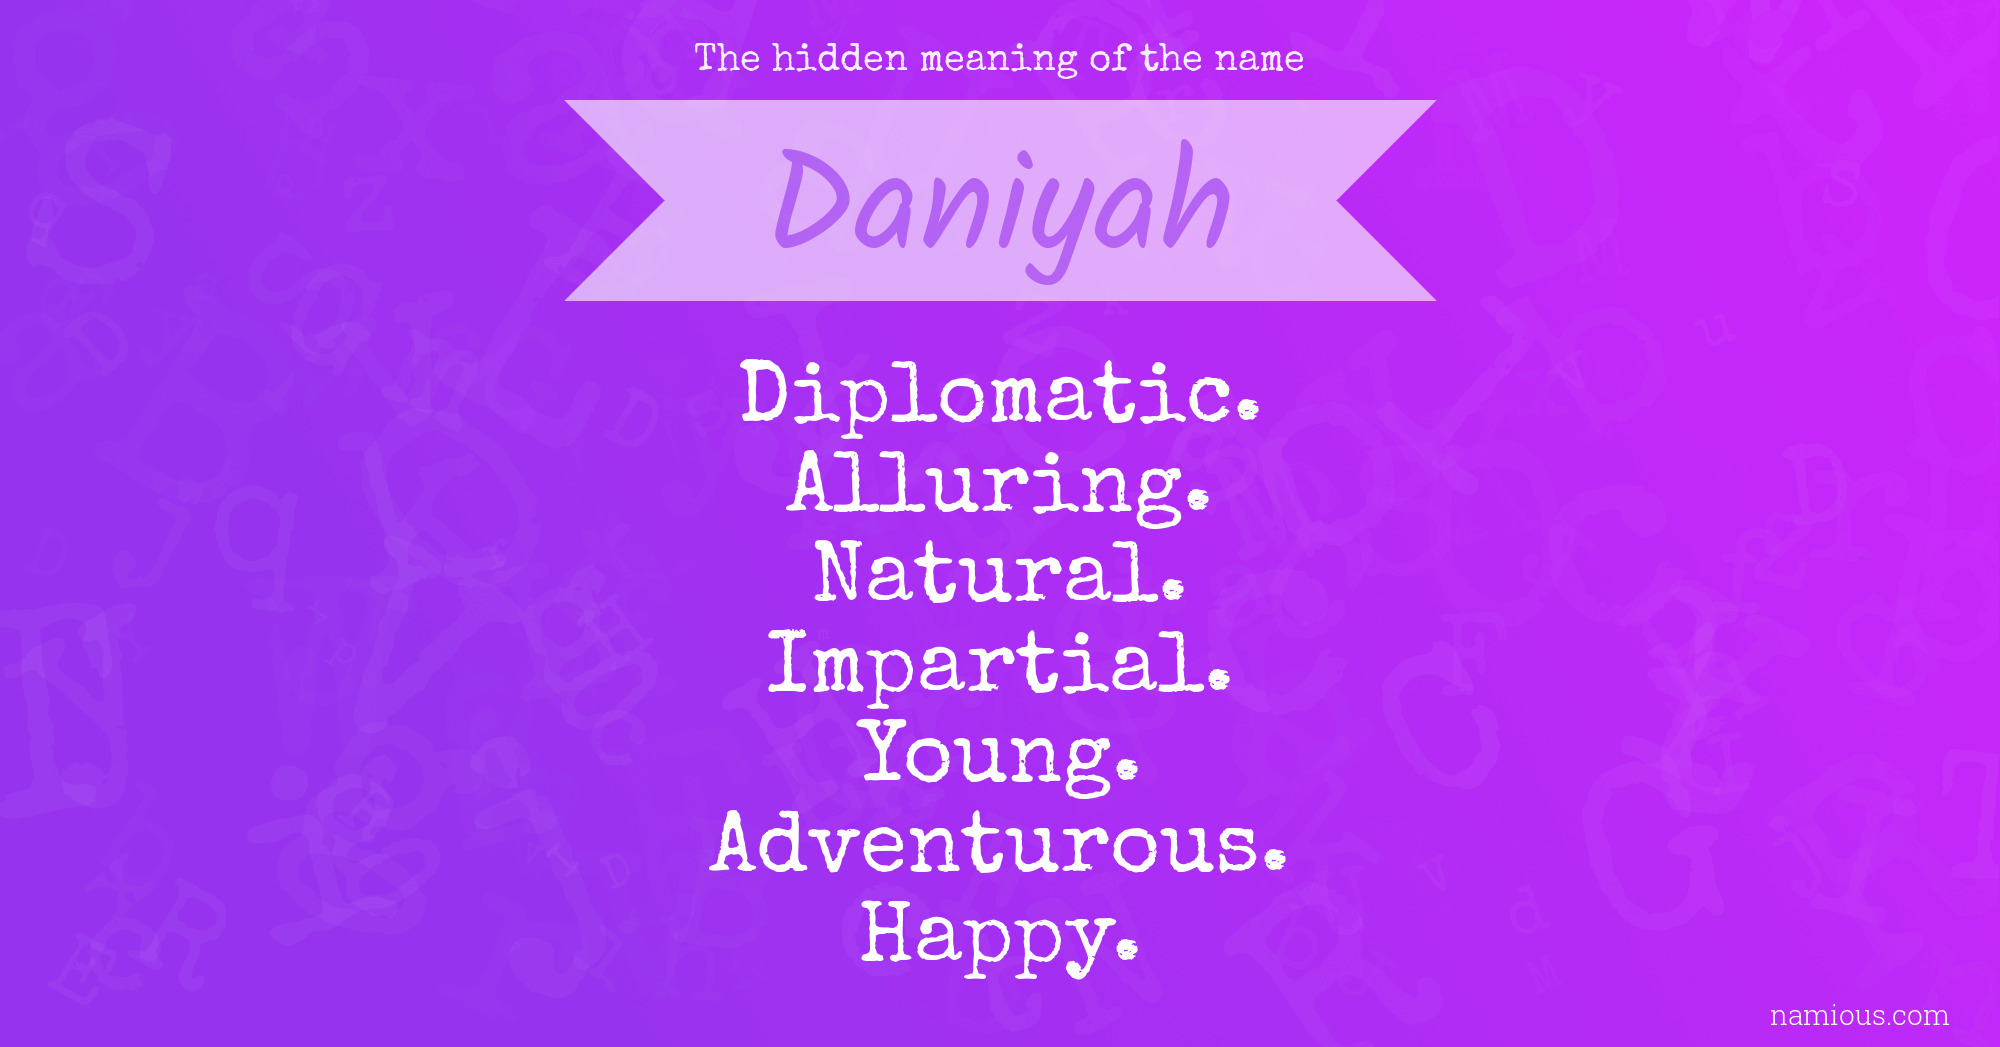 The hidden meaning of the name Daniyah